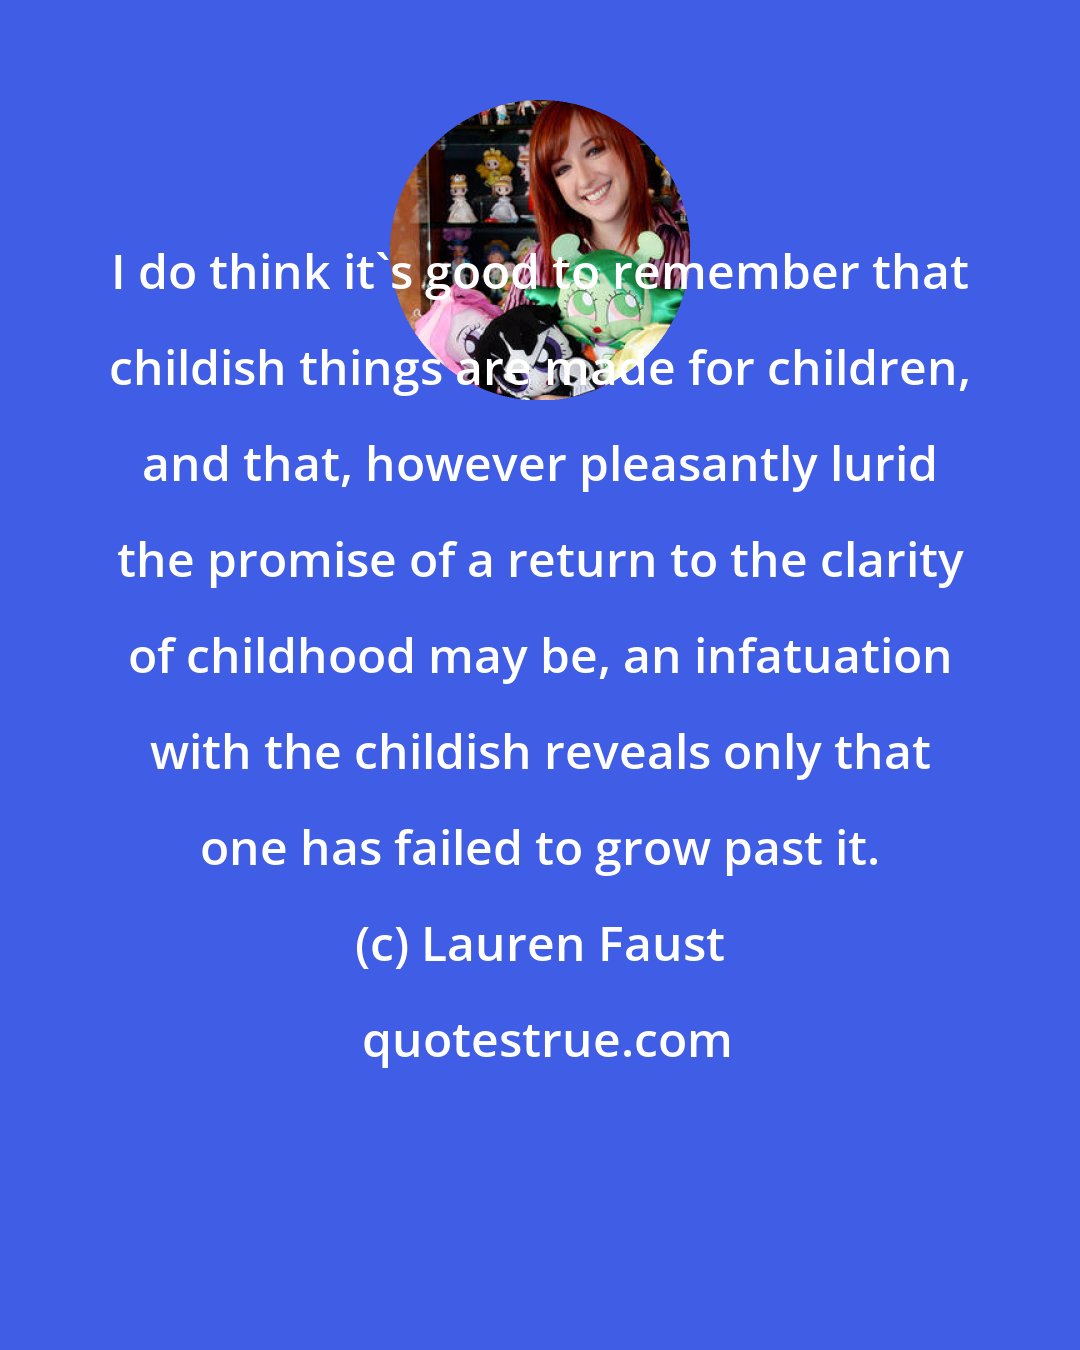 Lauren Faust: I do think it's good to remember that childish things are made for children, and that, however pleasantly lurid the promise of a return to the clarity of childhood may be, an infatuation with the childish reveals only that one has failed to grow past it.